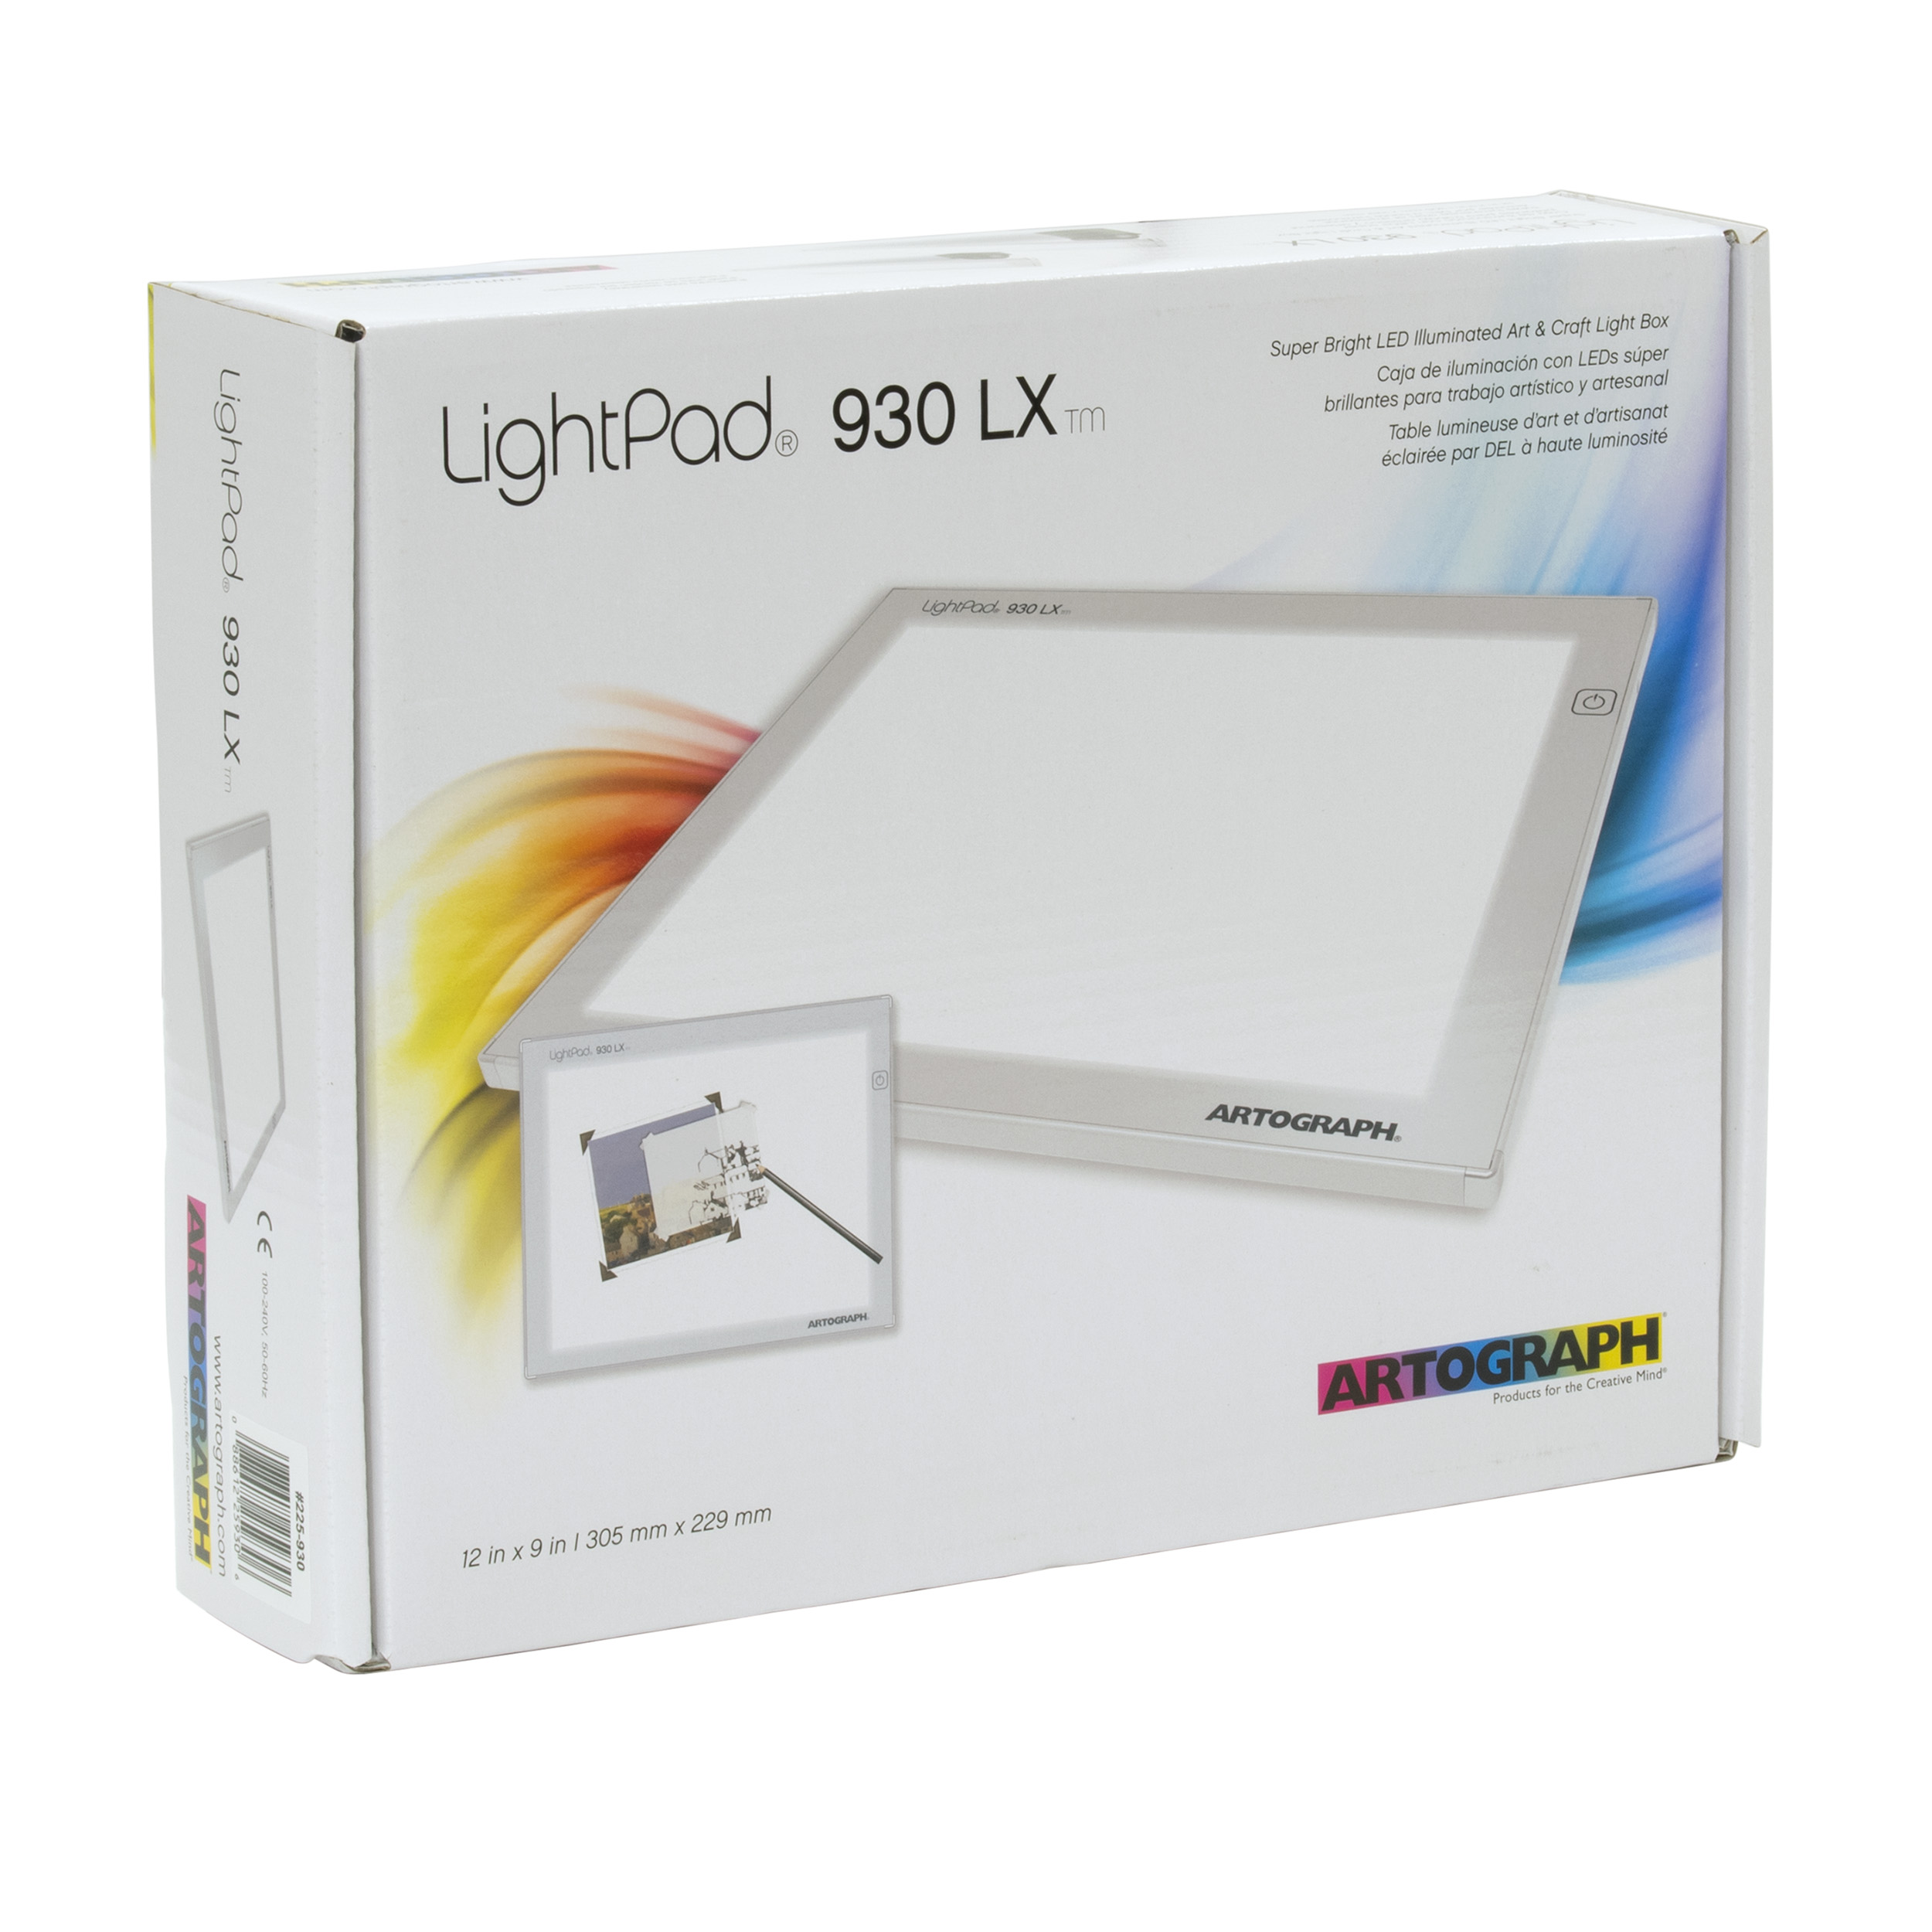 Artograph LightPad® 930 LX - 12" x 9" Thin, Dimmable LED Light Box for Tracing, Drawing - image 2 of 7